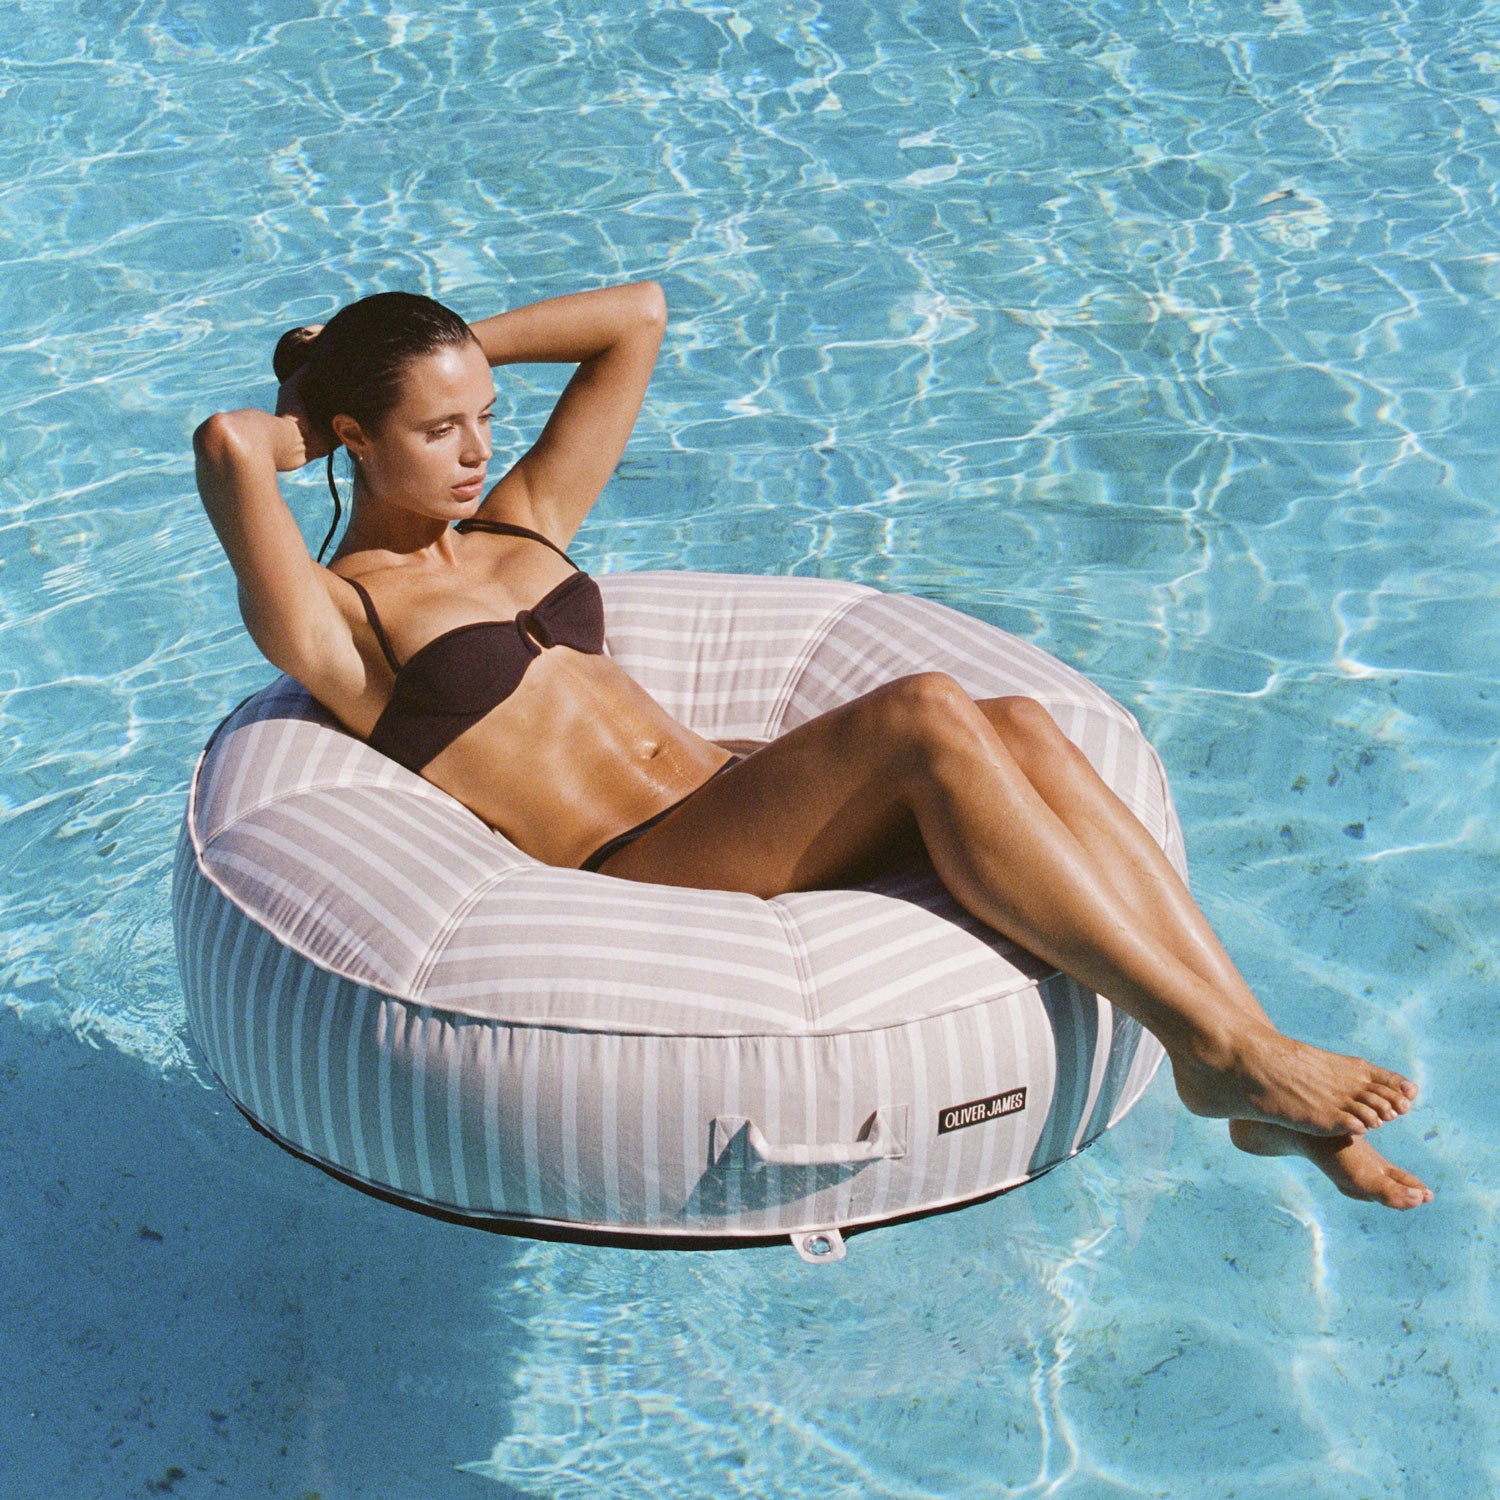 A women on a white and beige striped ring pool float lounger for adults floating in a swimming pool.